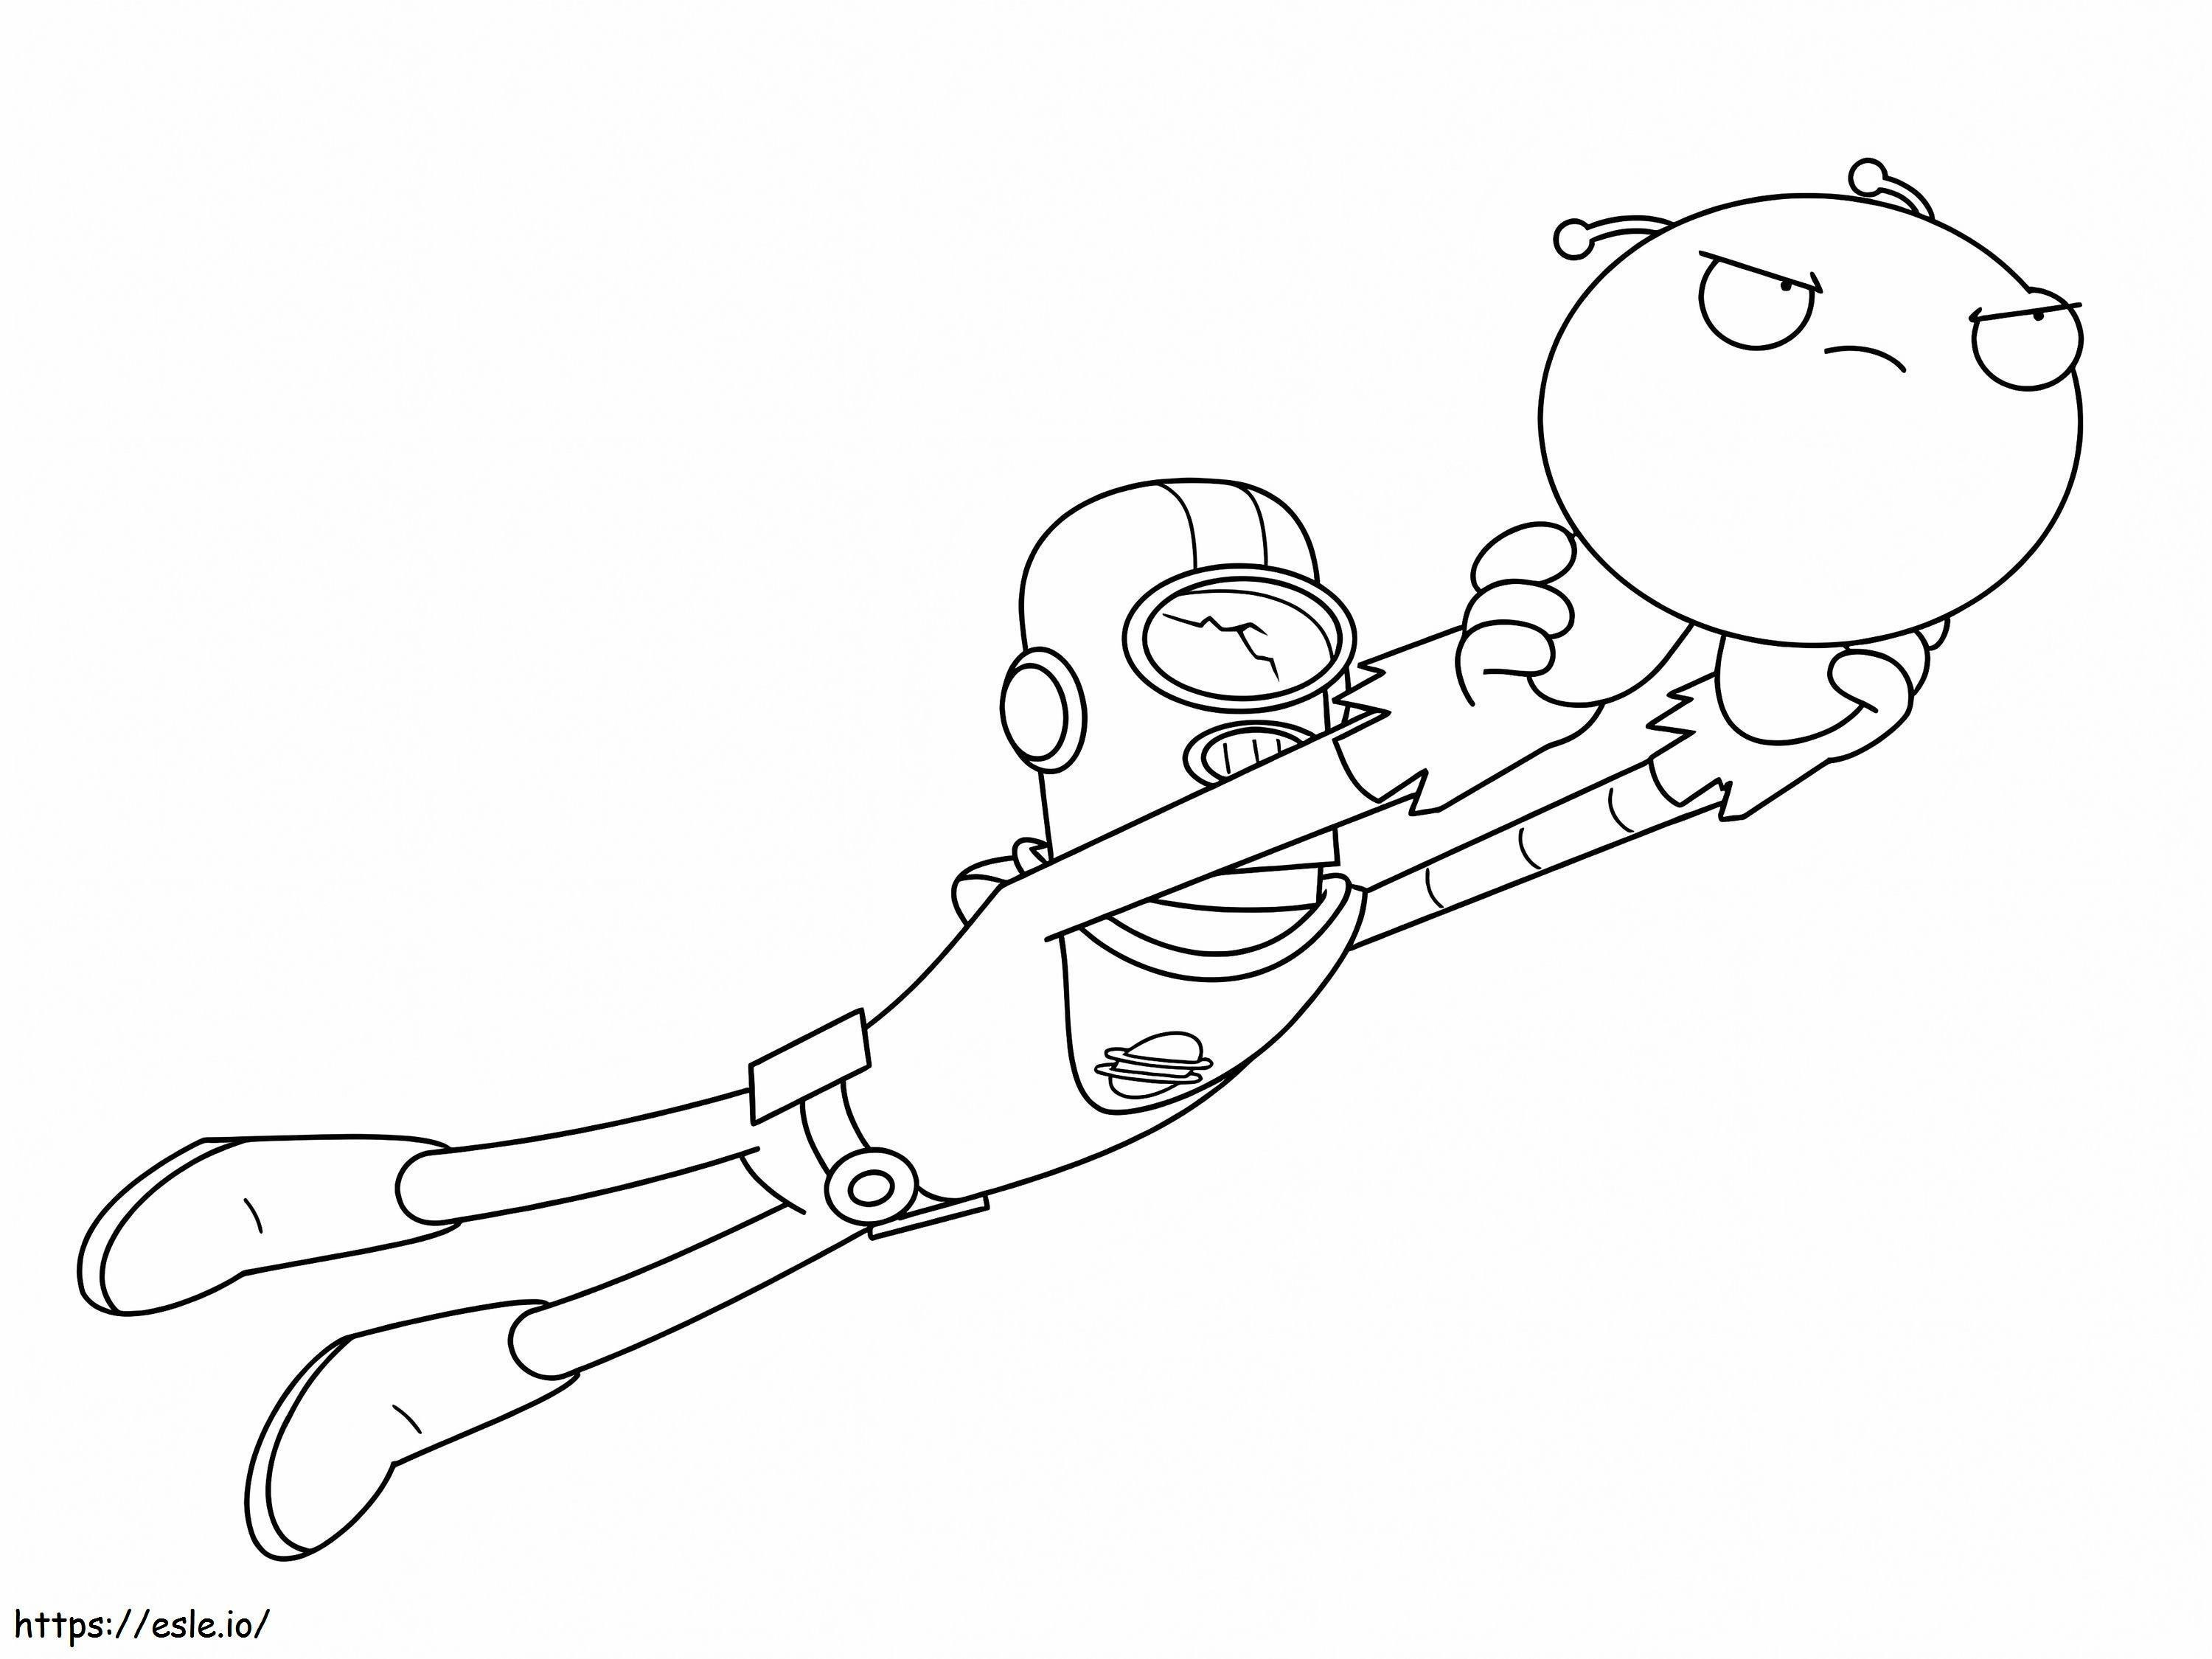 Gary Goodspeed And Mooncake From Final Space coloring page